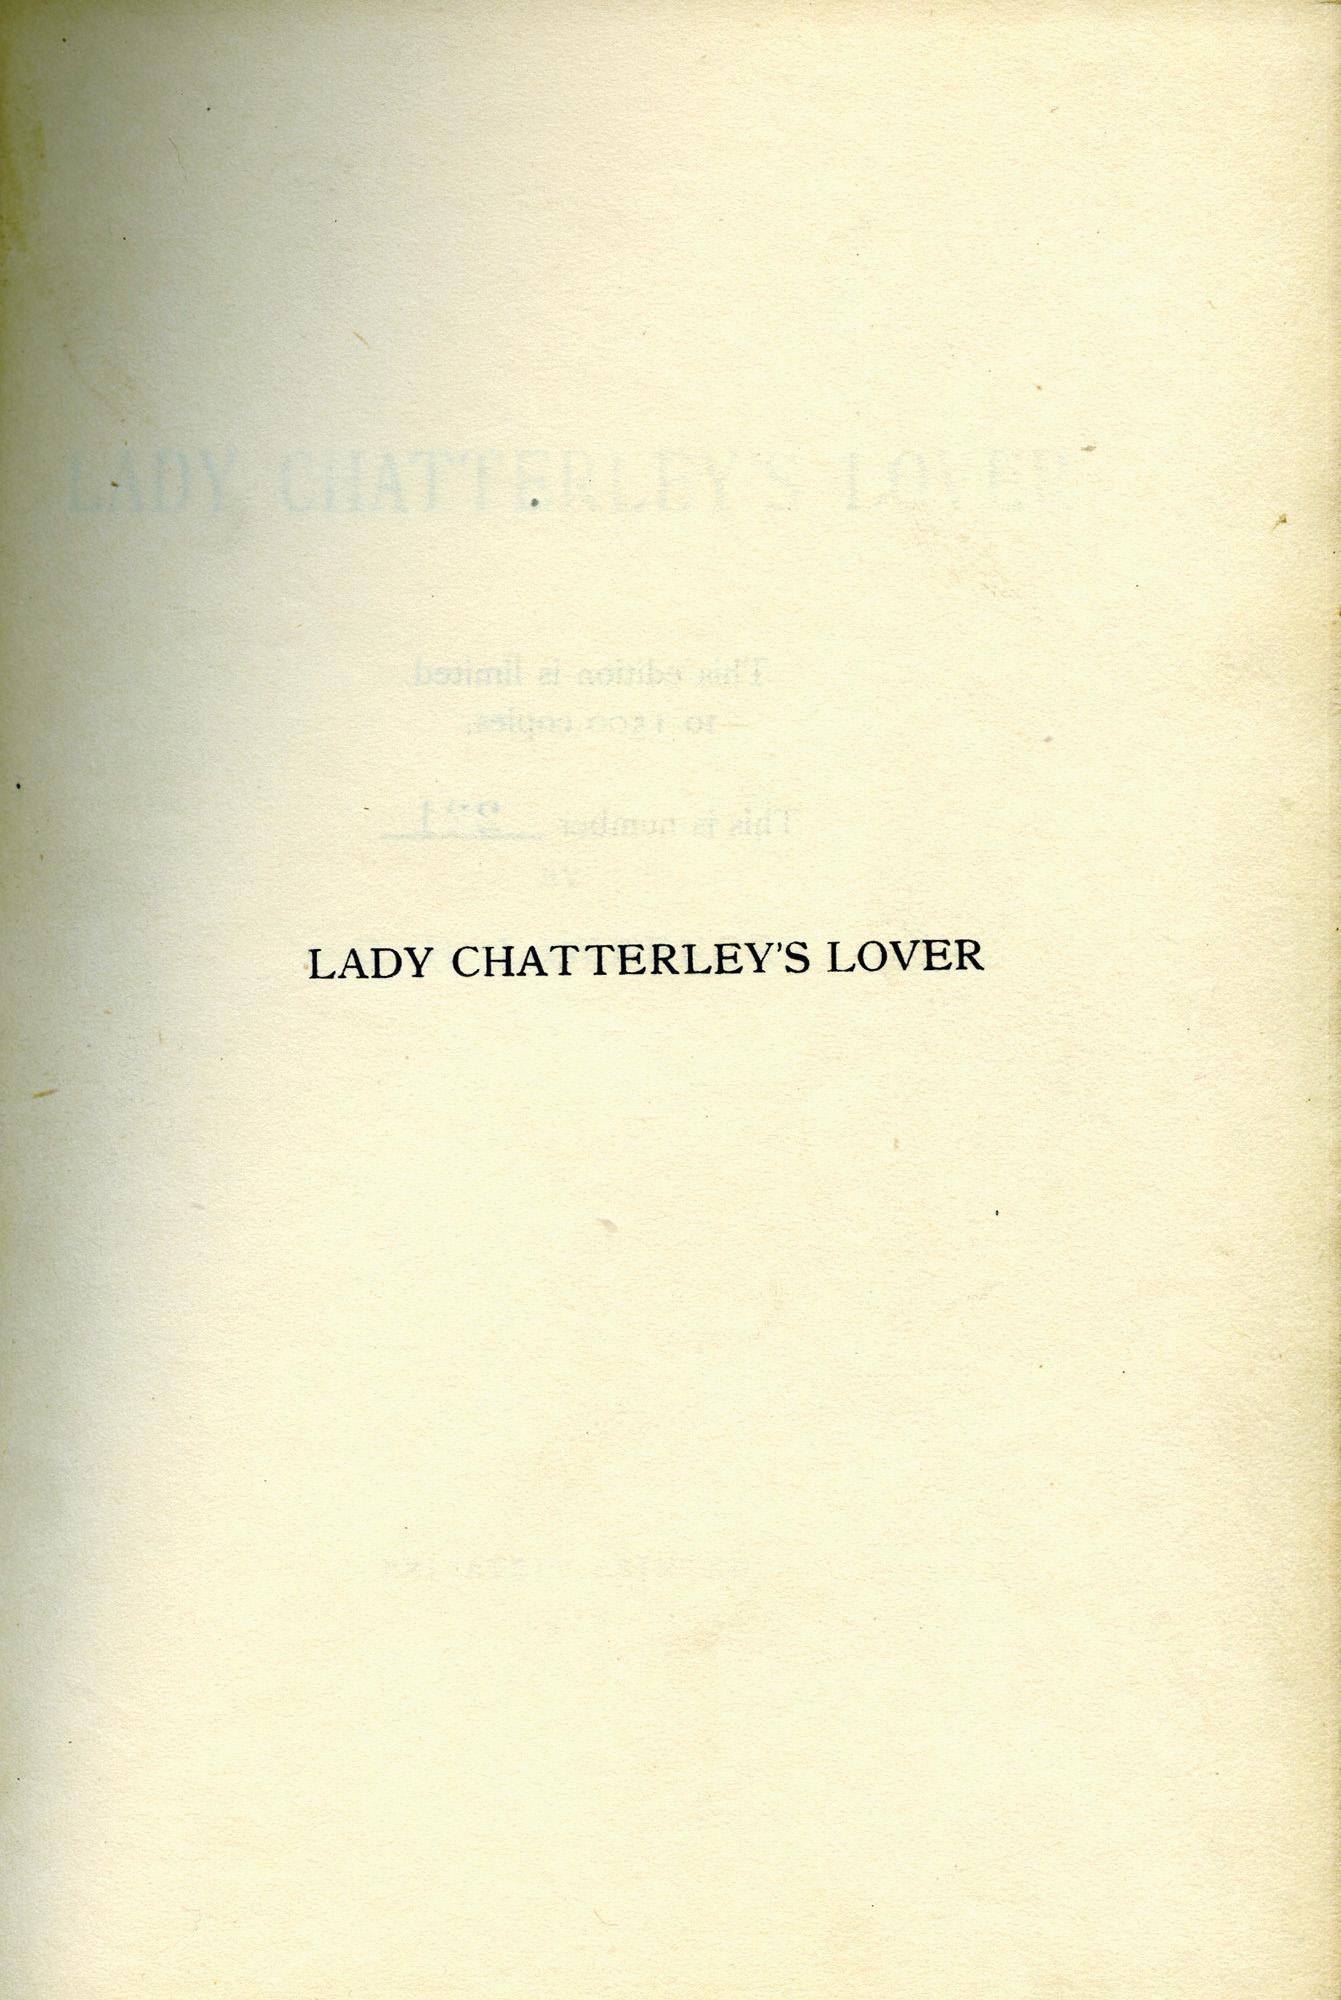 Lady Chatterly's Lover by D.H. Lawrence - PIRATED EDITION For Sale 3